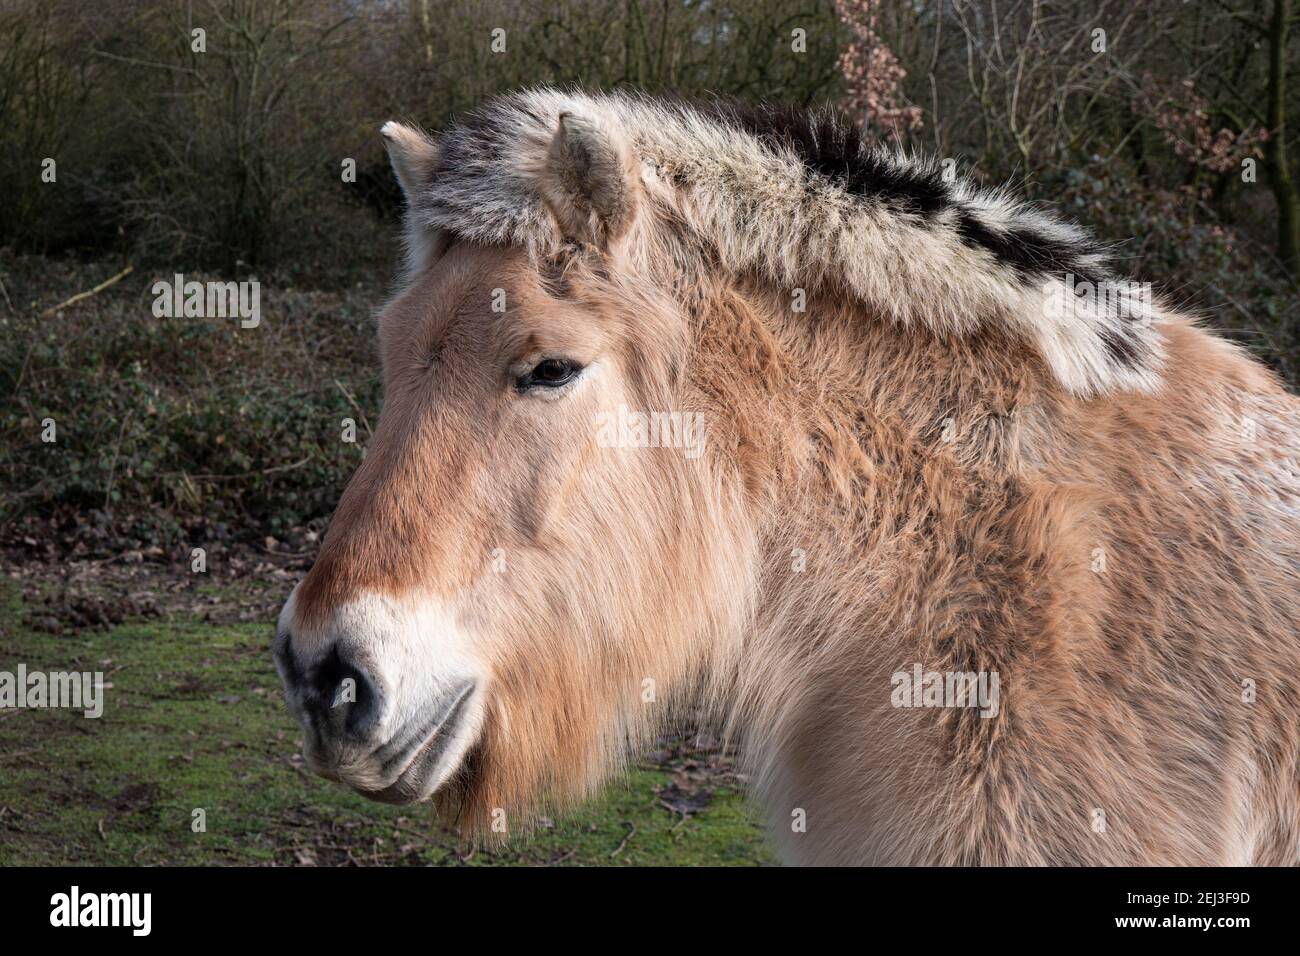 Close up portrait photo of a Nordic Fjord horse Stock Photo